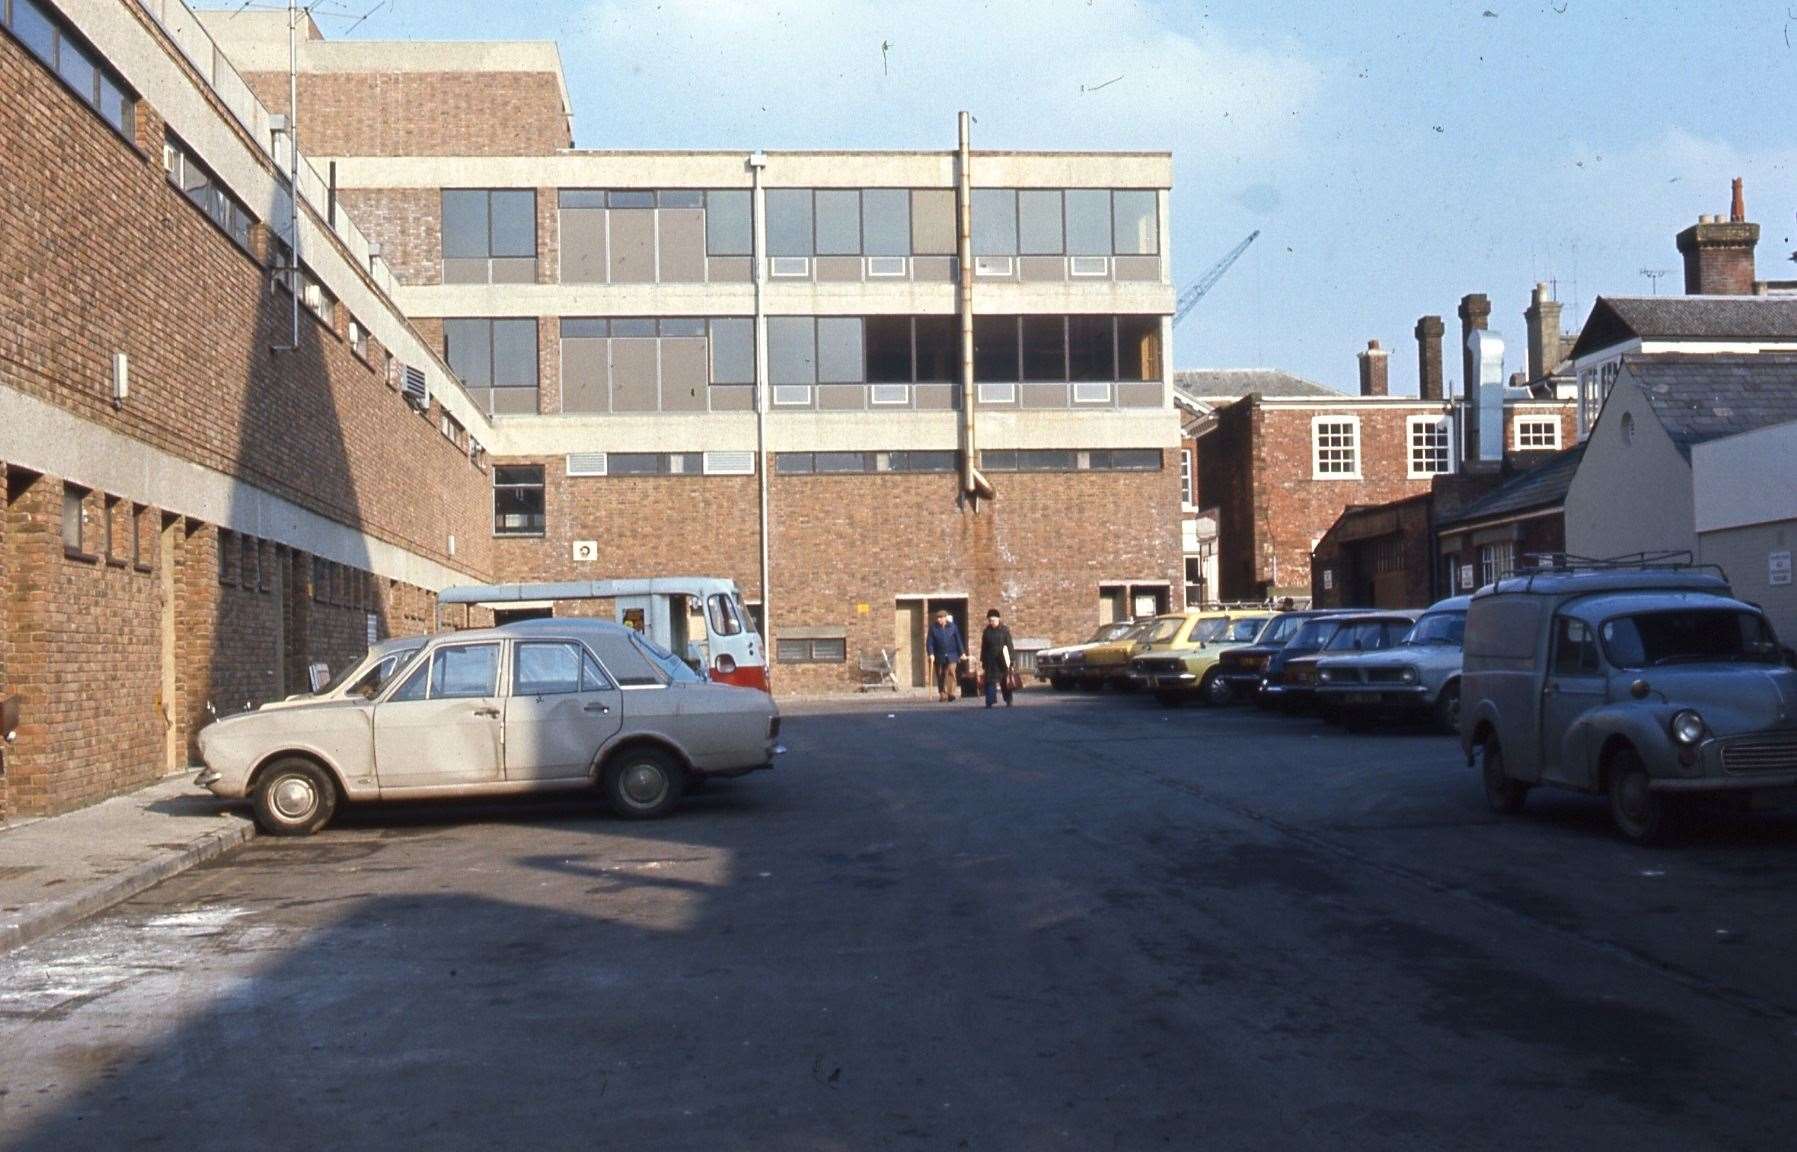 1976 - One of the Tufton Centre service areas behind Bank Street being used for parking before such acts were banned by landowners. Picture: Steve Salter